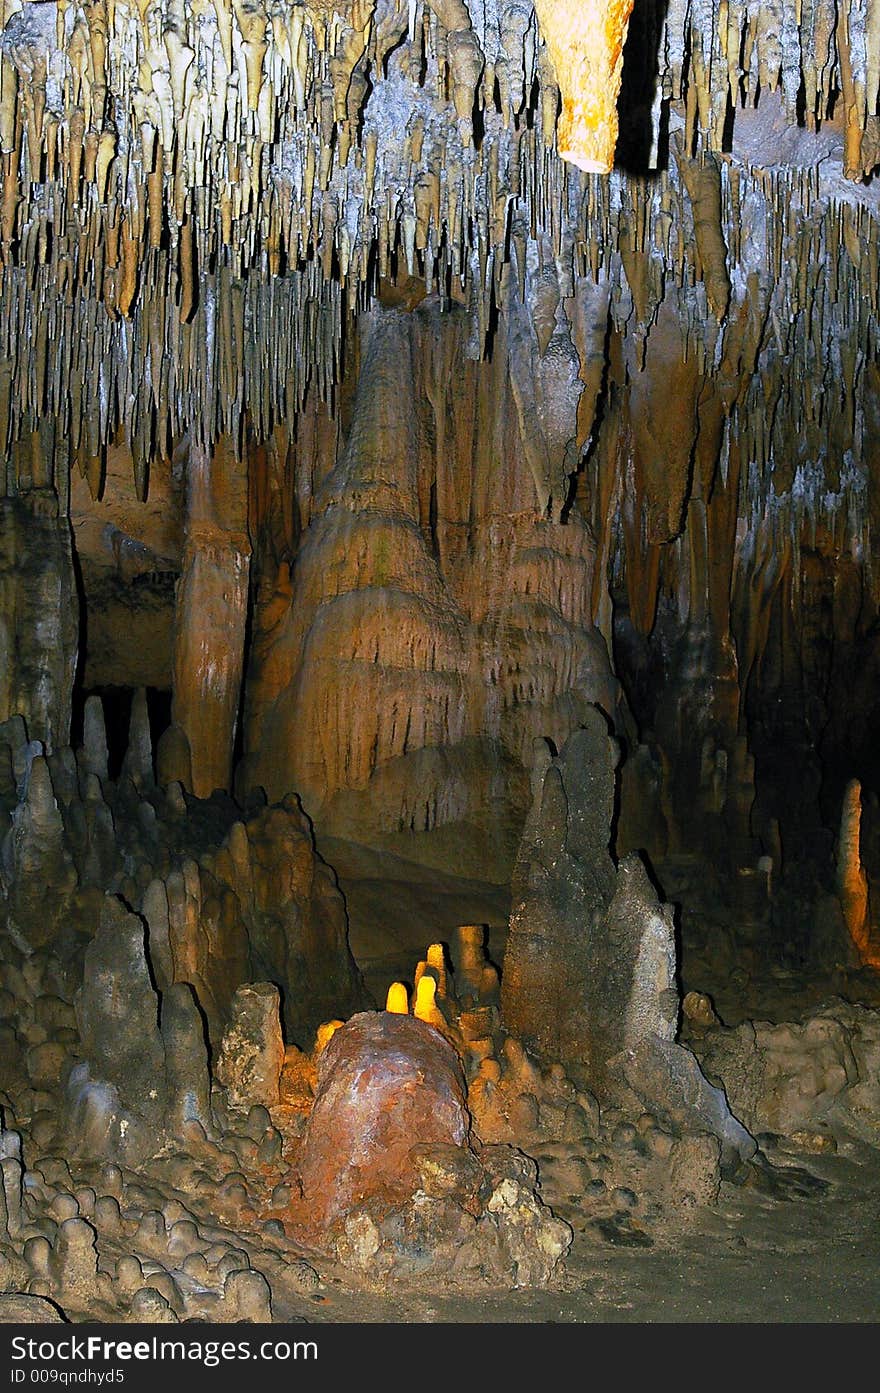 Cathedral formation inside a cavern in northern florida. Cathedral formation inside a cavern in northern florida.